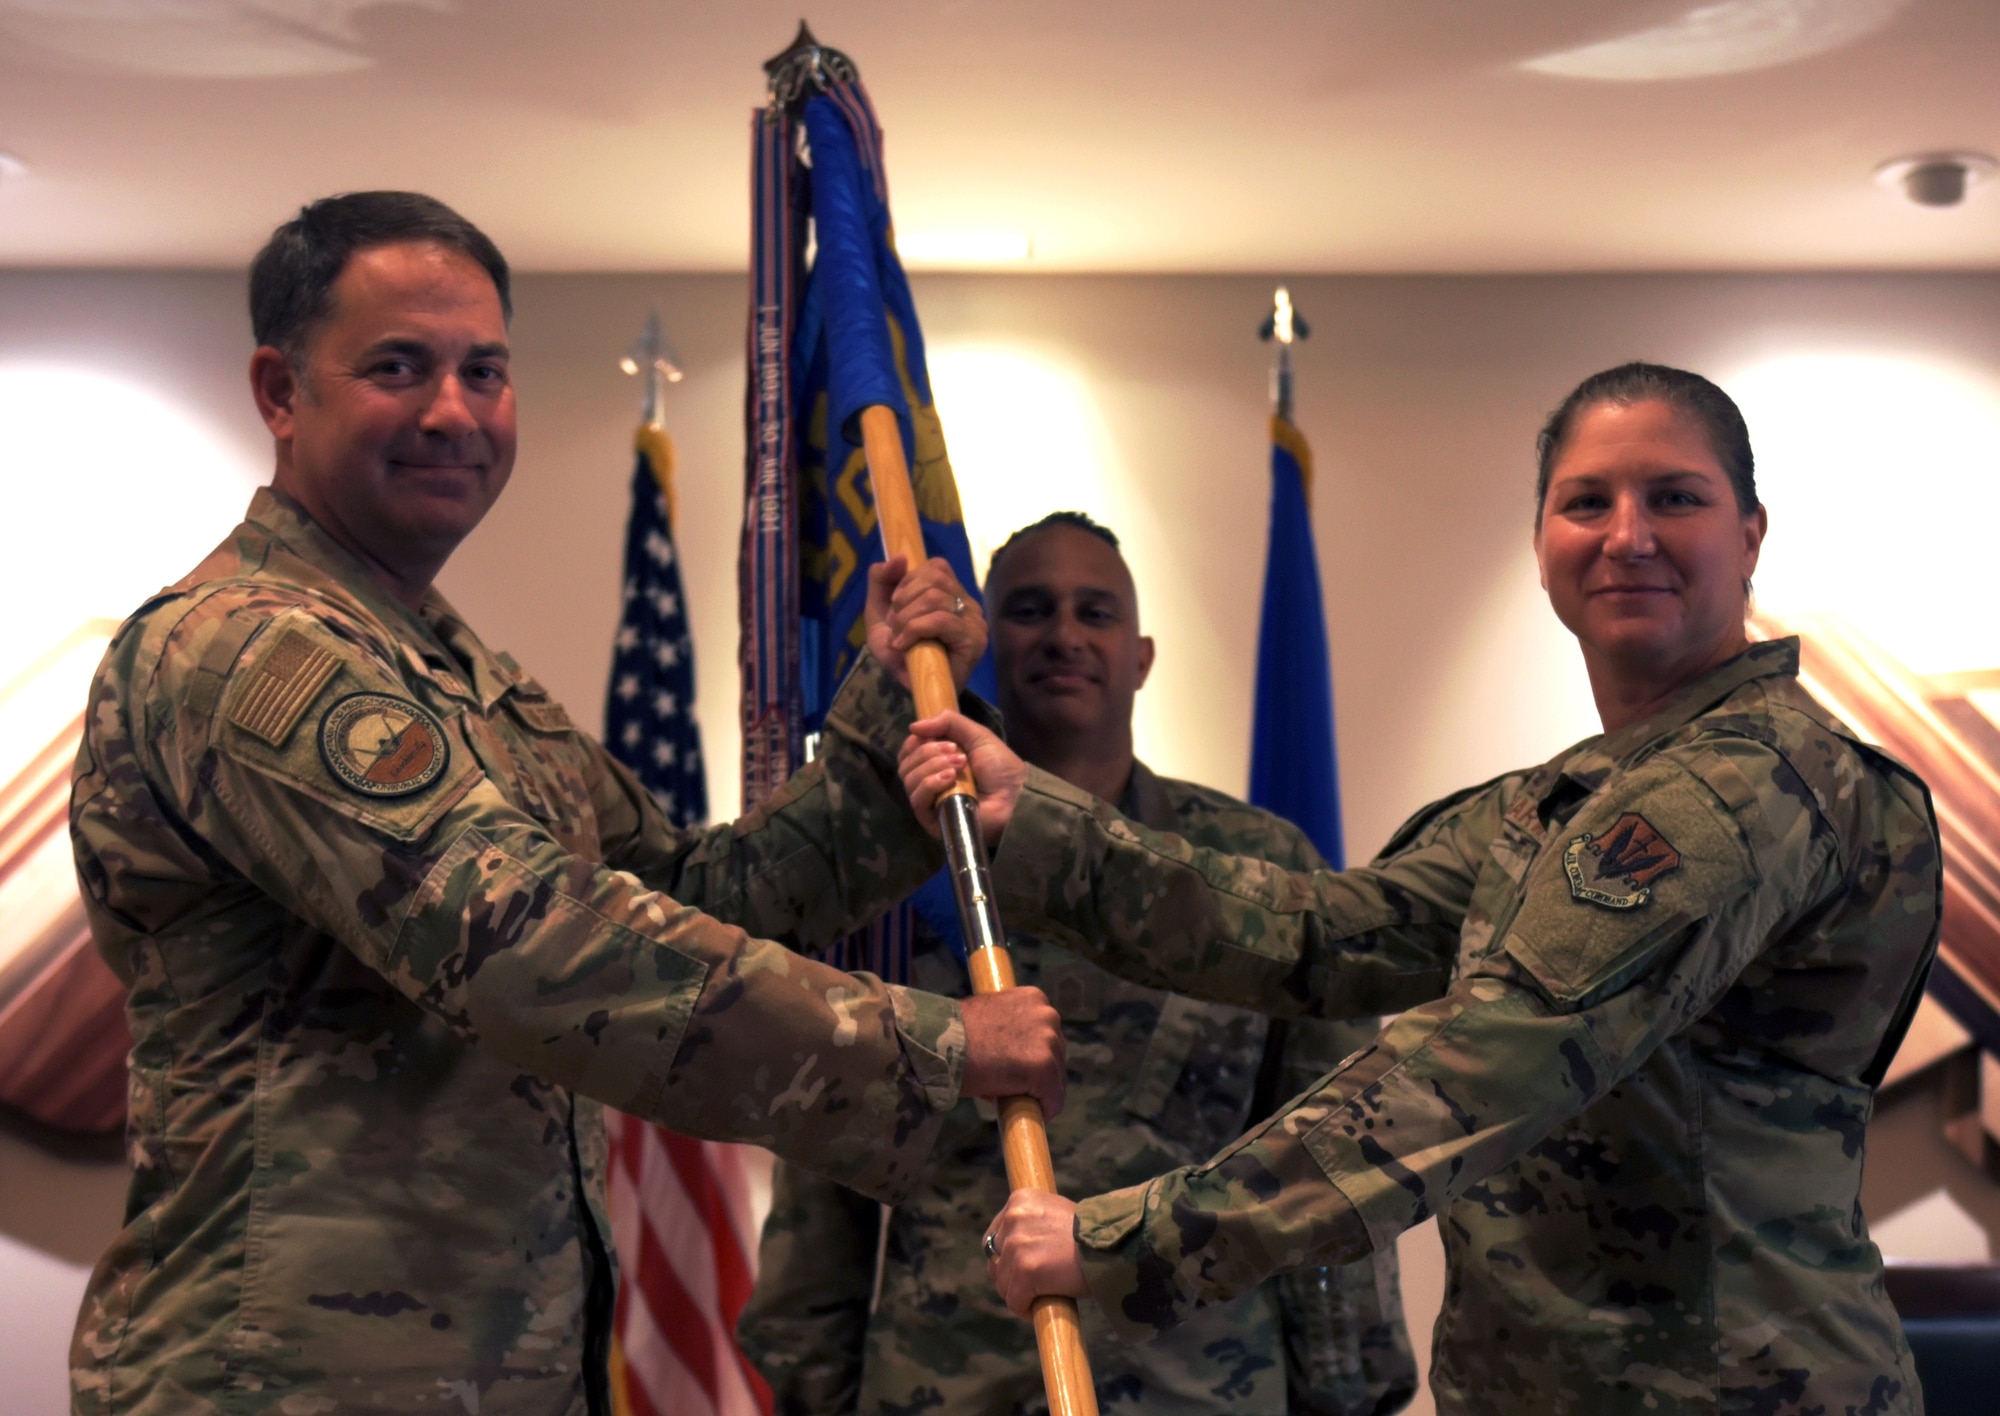 Two people hold a guidon